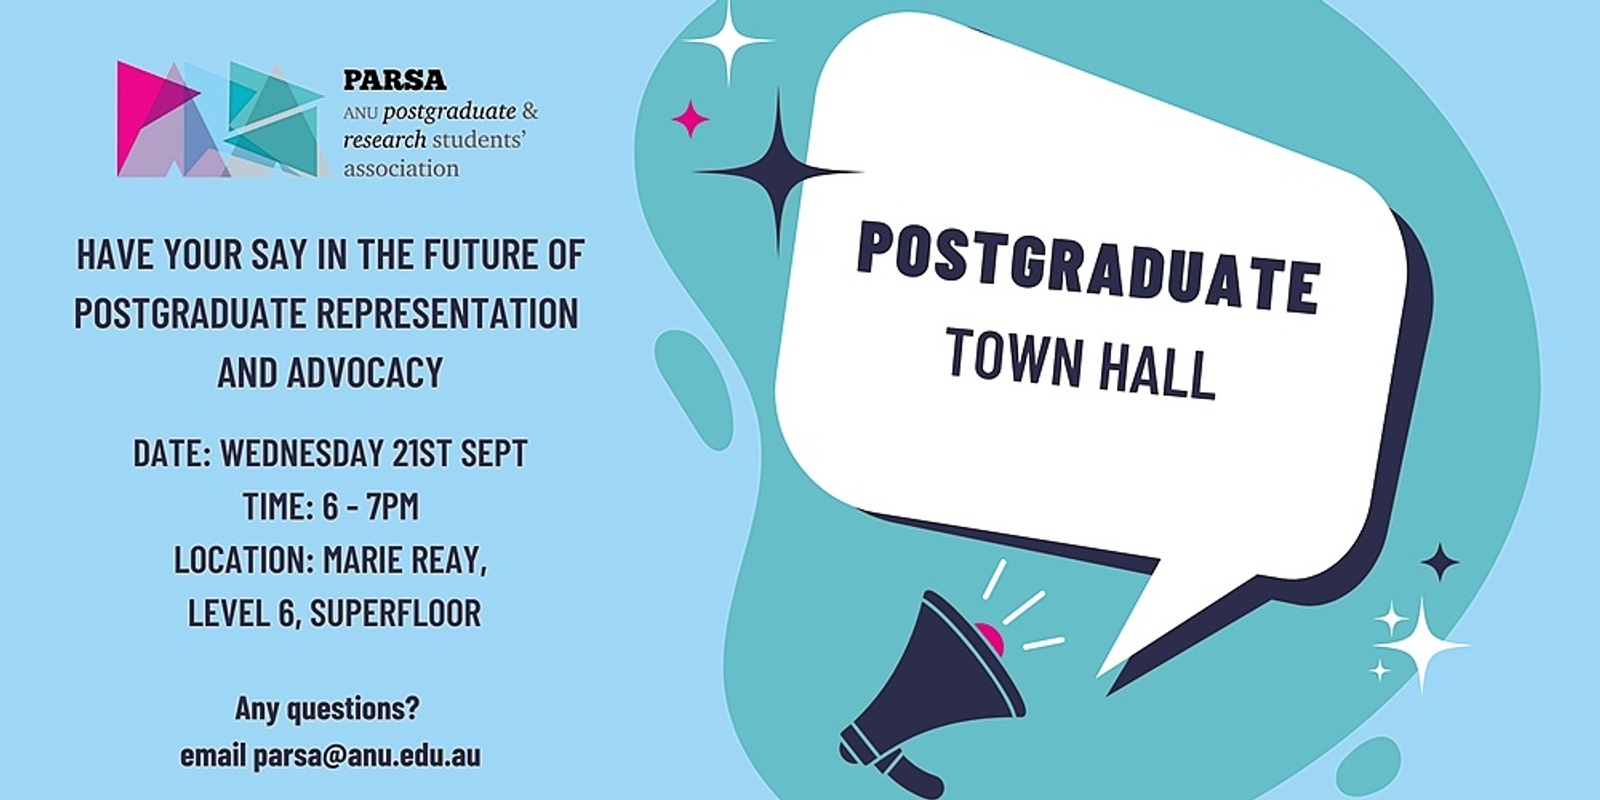 Banner image for Postgraduate Town Hall 